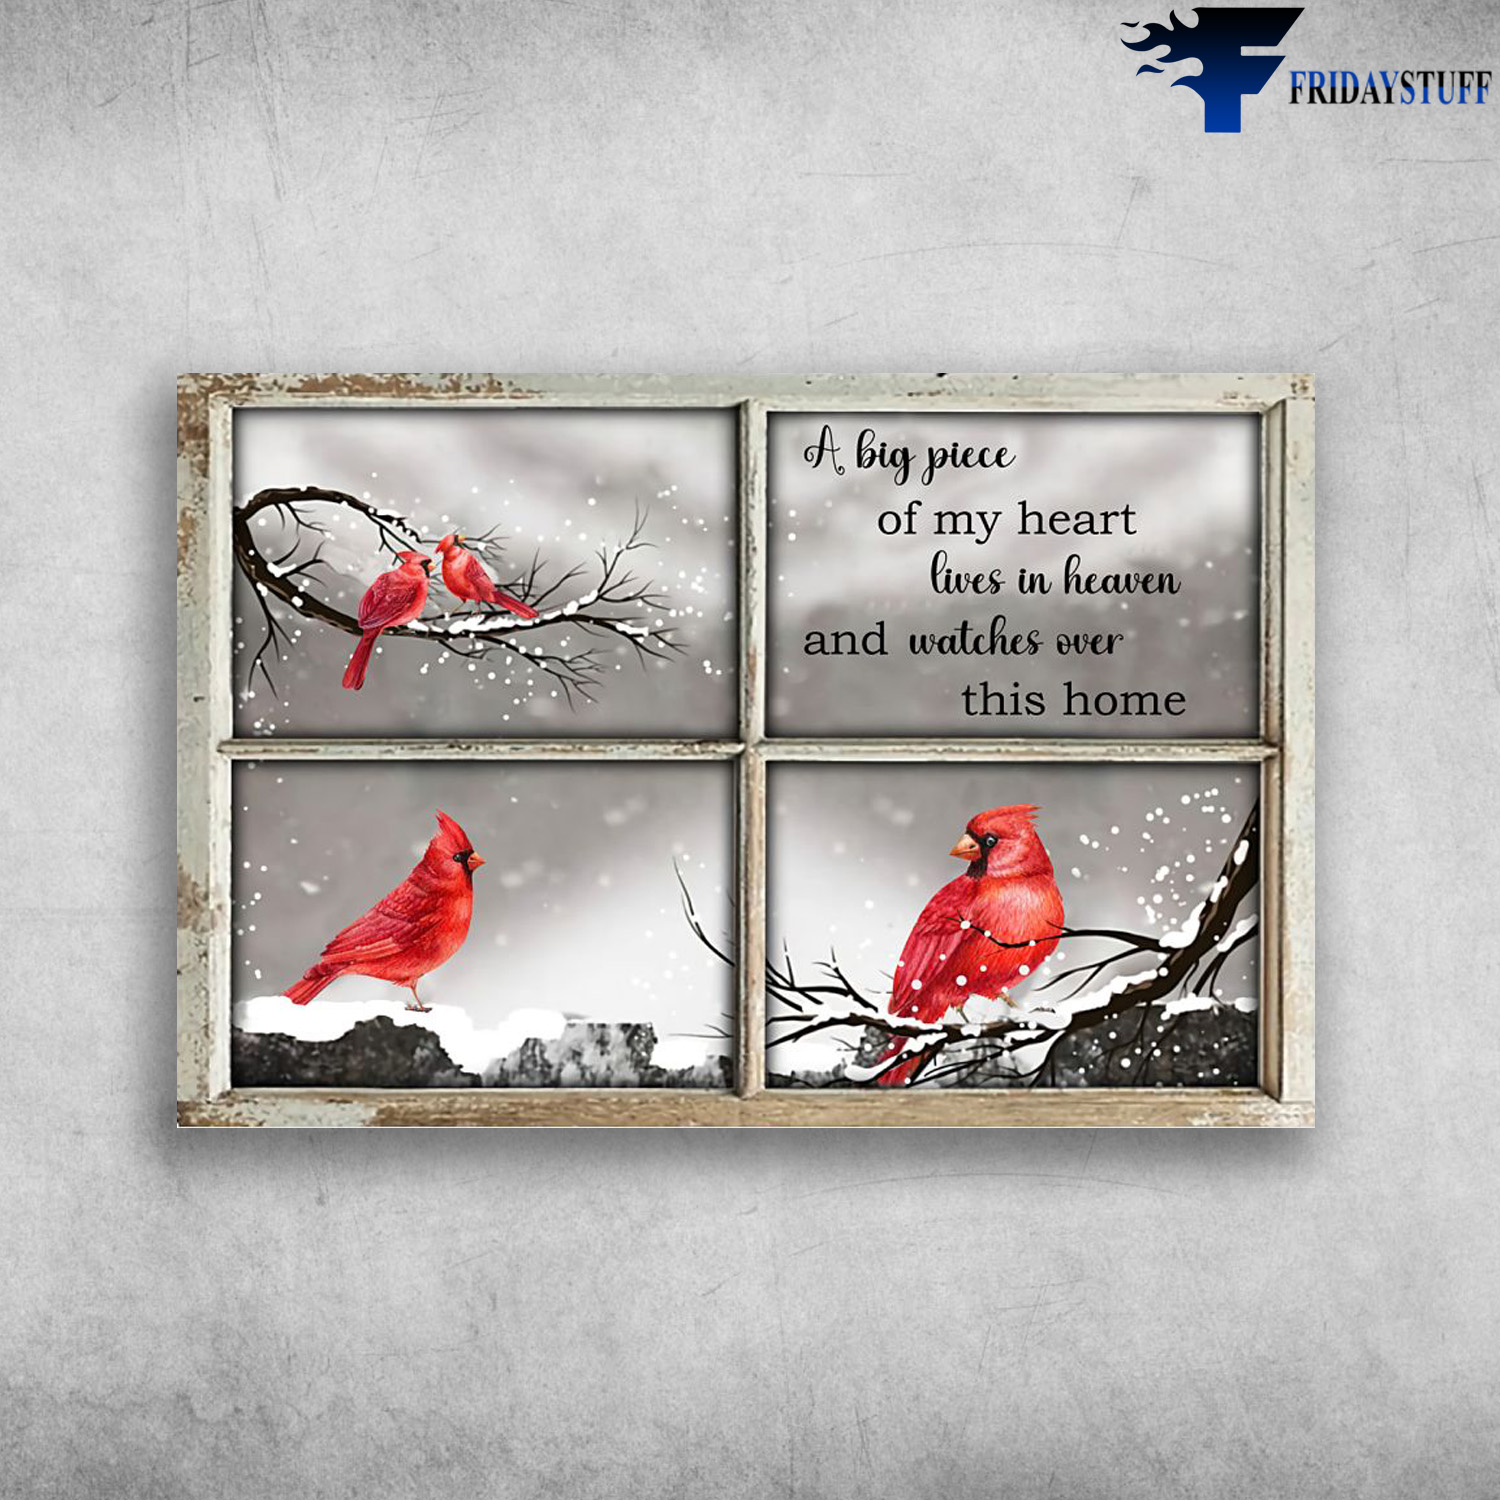 Cardinal Bird Window - A Big Piece Of My Heart, Lives In Heaven, And Watches Over This Home